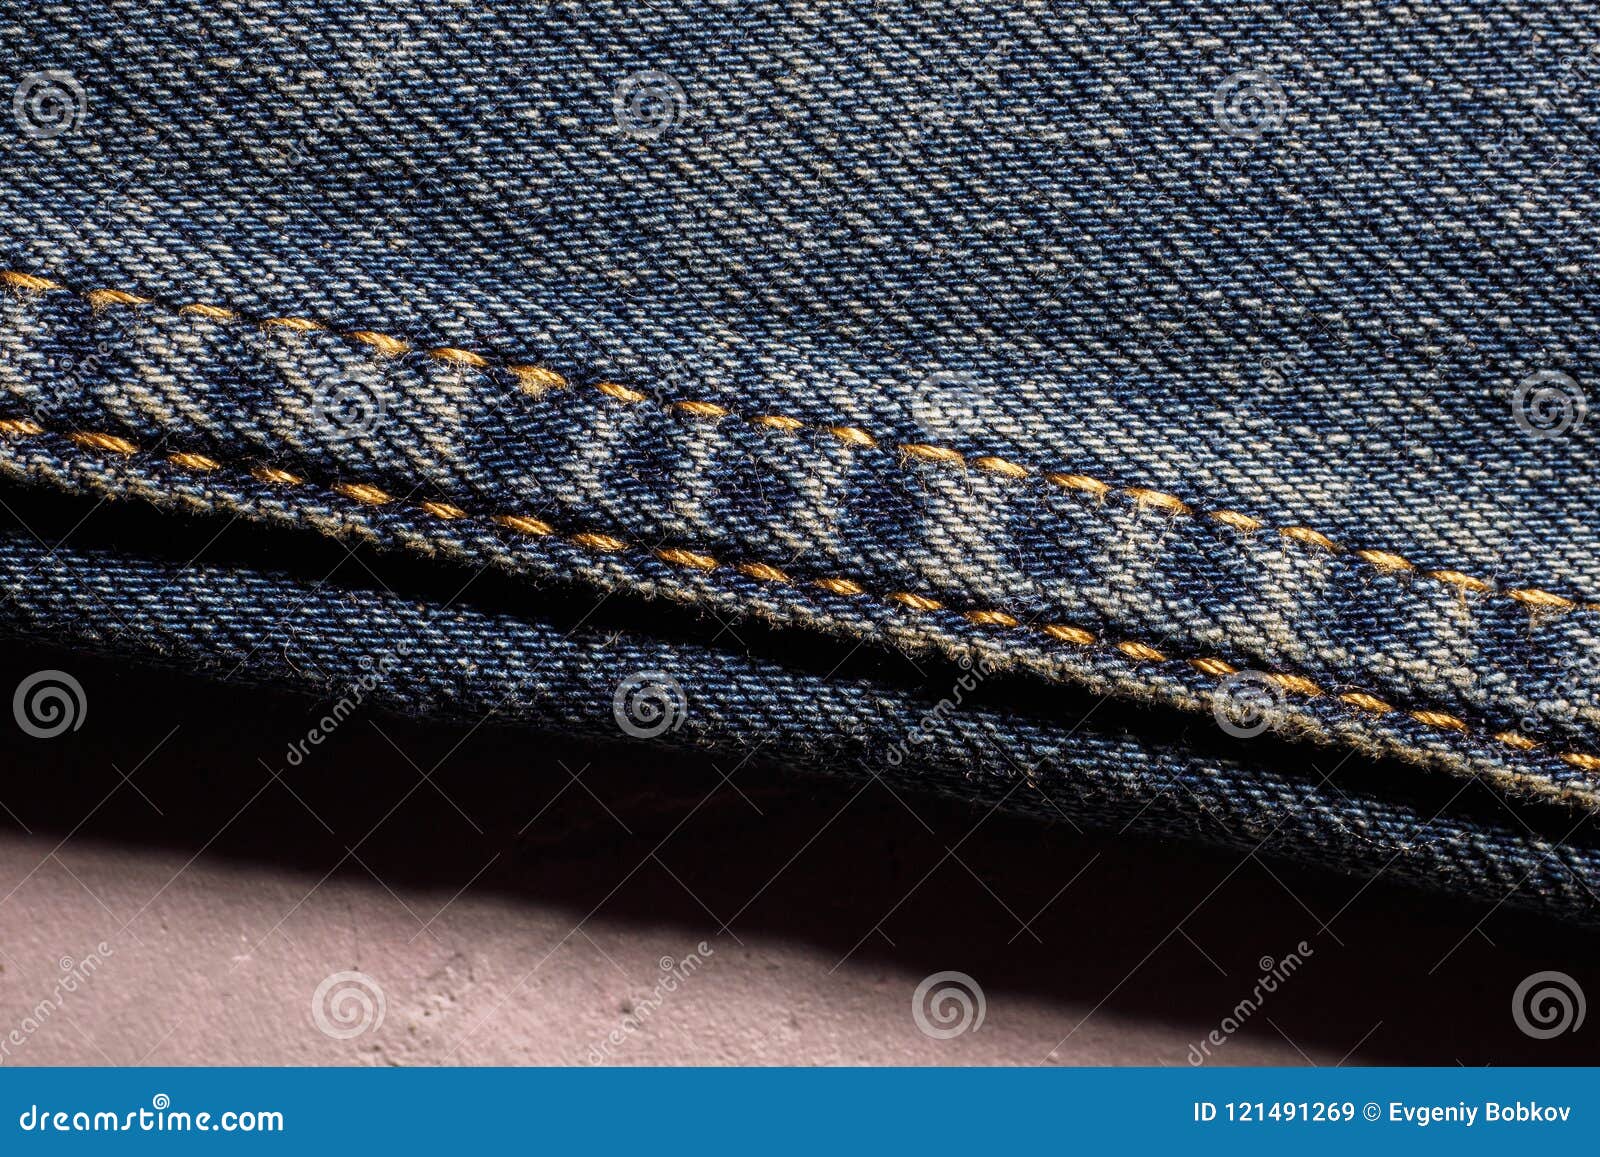 Detail of a Vintage Textured Blue Jeans Background Stock Image - Image ...